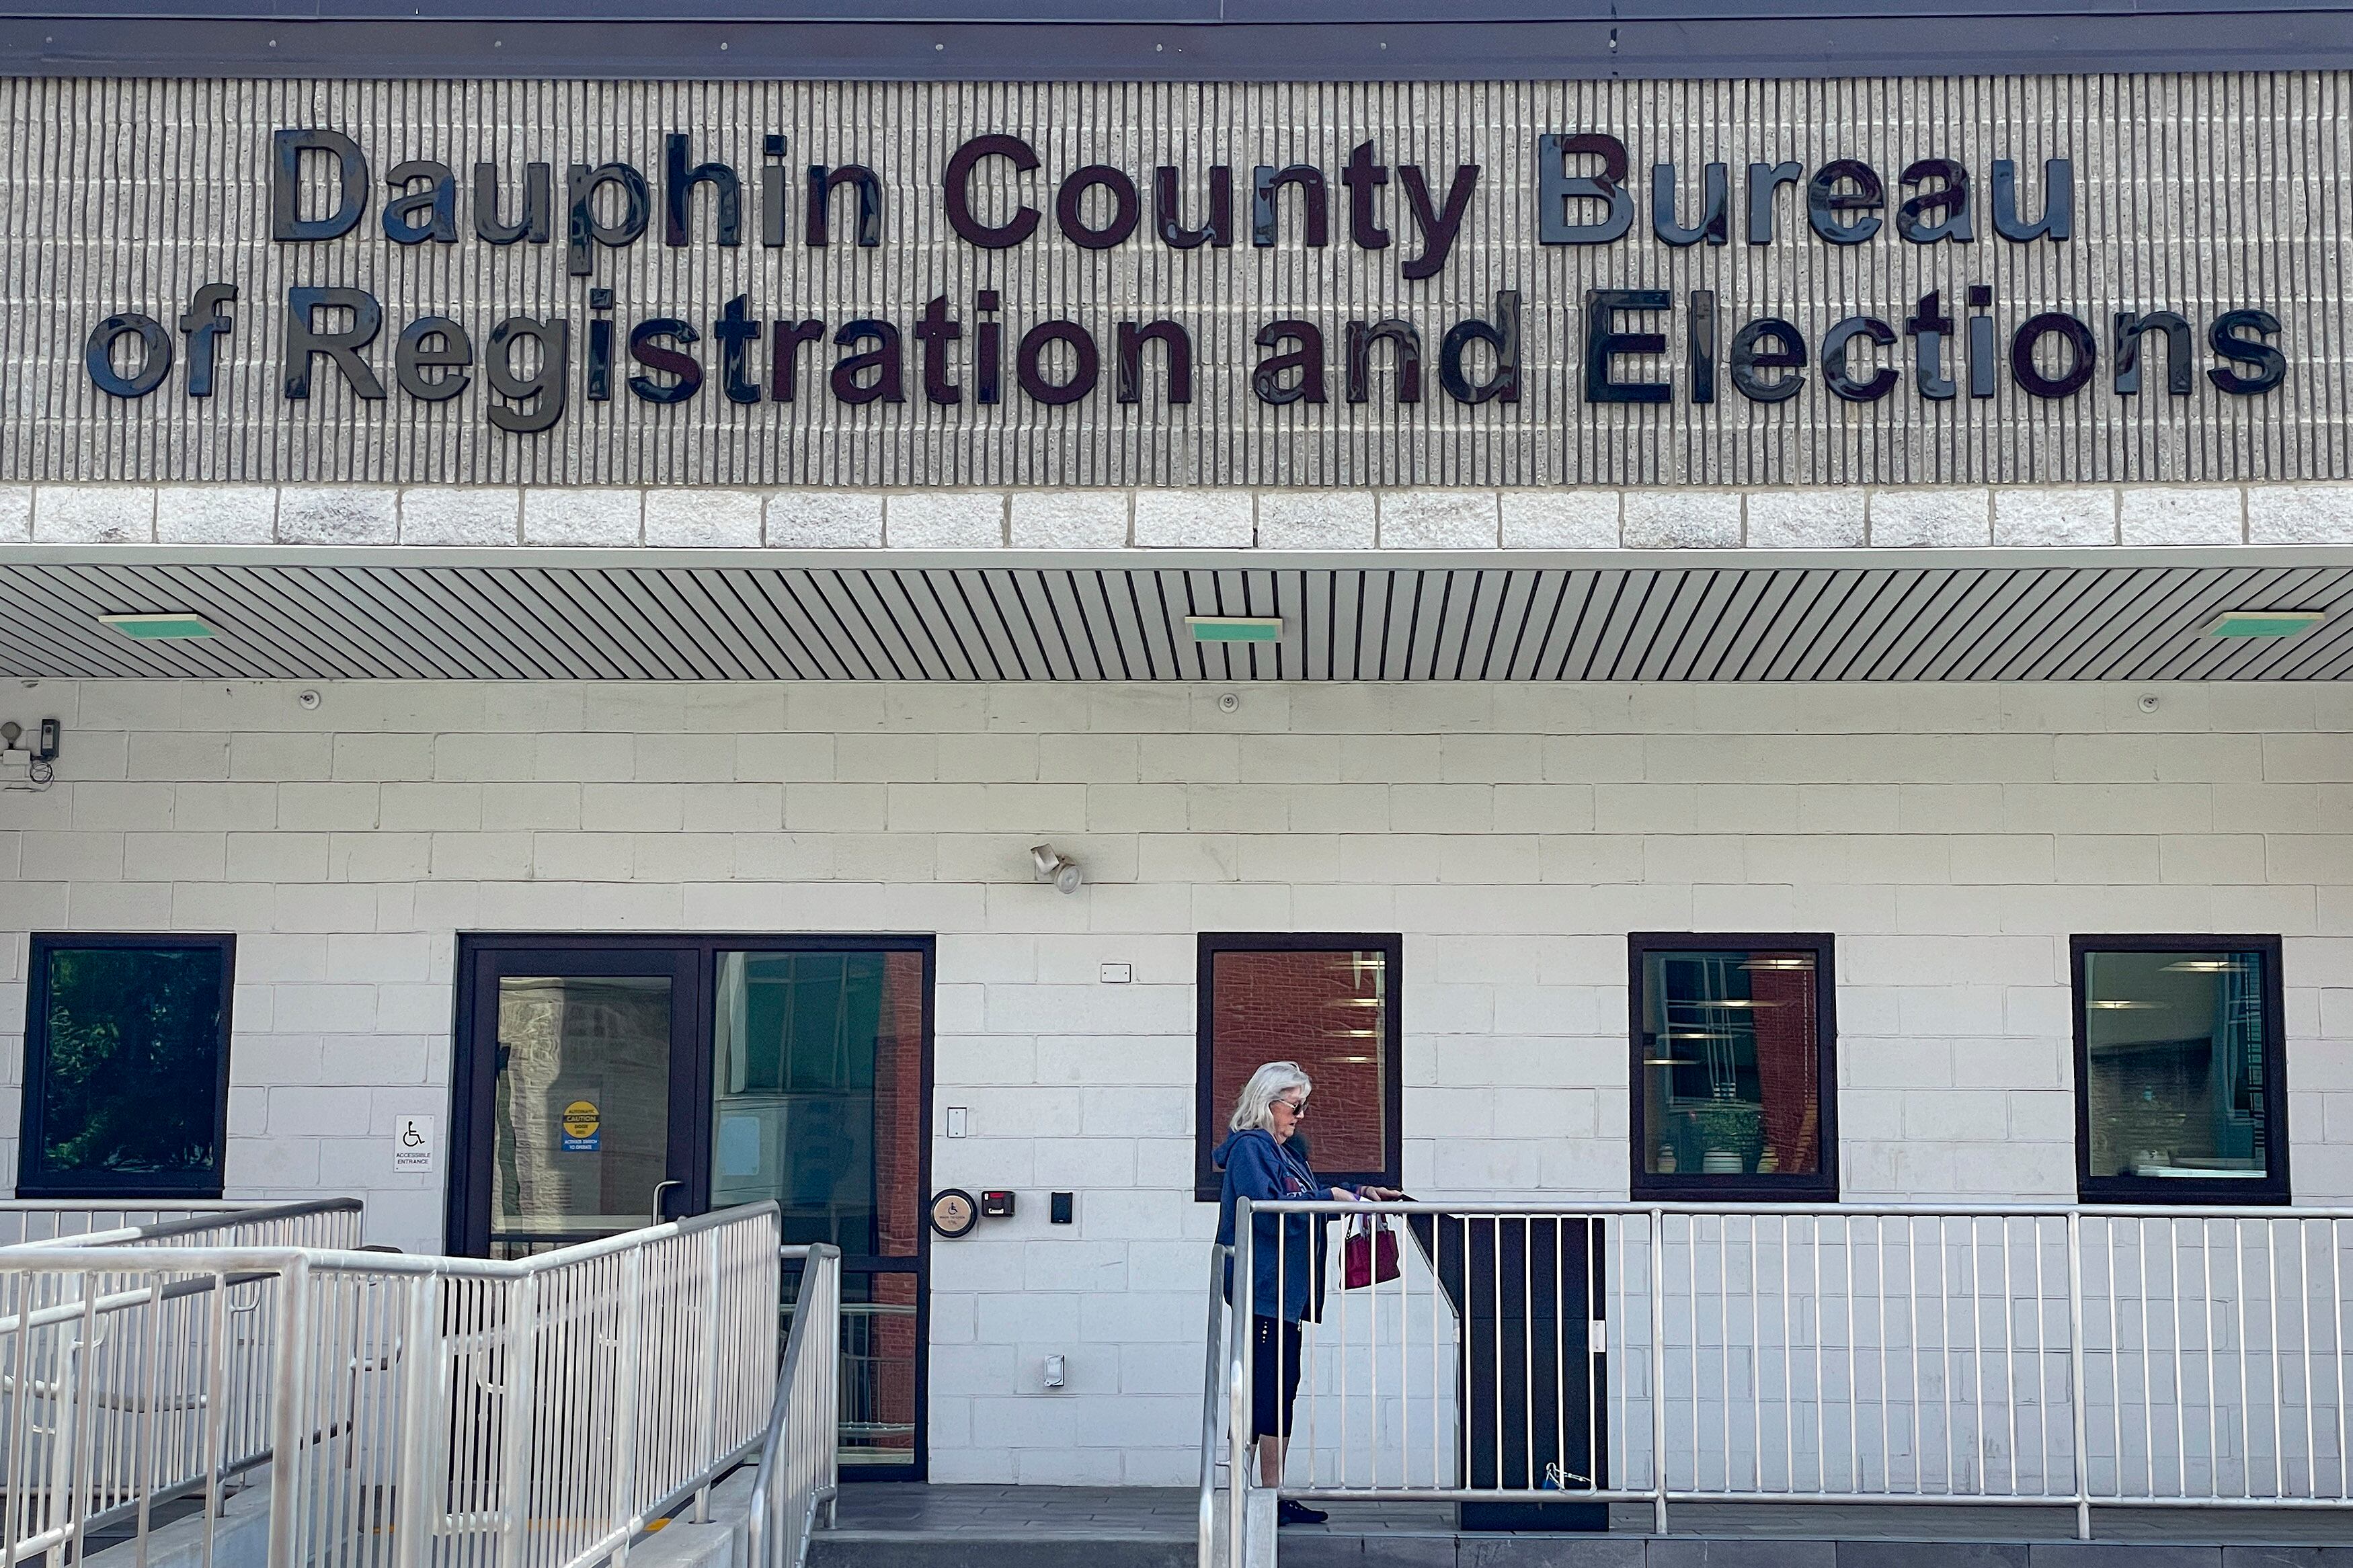 A person with short white hair stands next to a ballot drop box in front of a building with the words "Dauphin County Bureau of Registration and Elections."